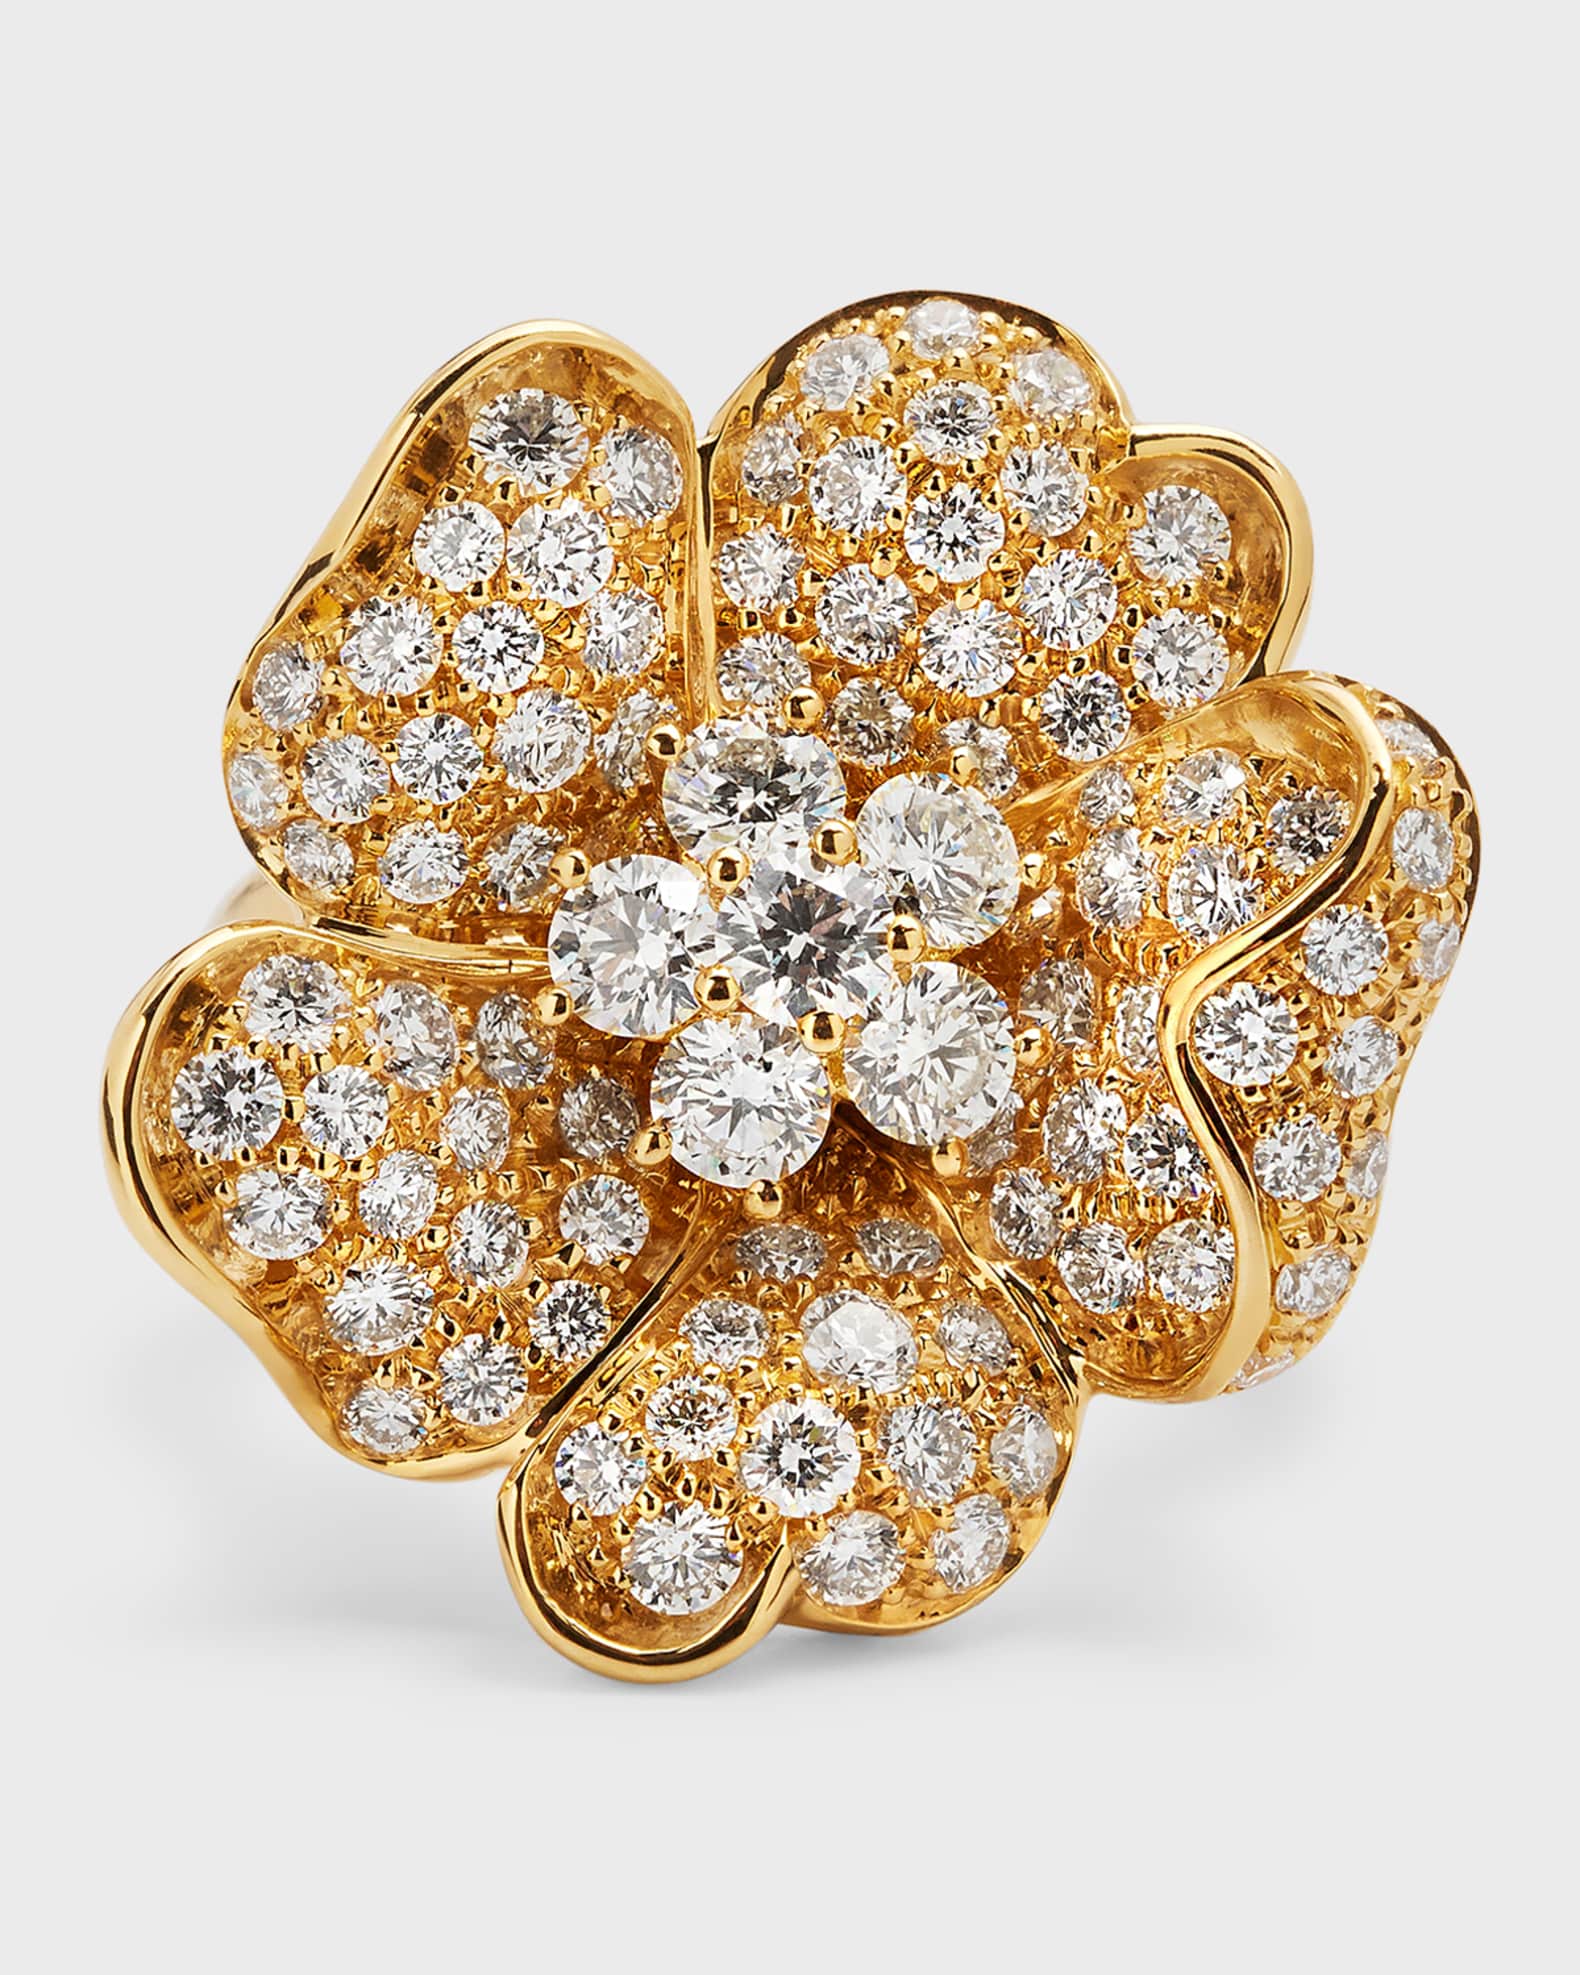 Louis Vuitton Color Blossom Ring, Yellow and White Gold, White Agate and Diamonds Gold. Size 50